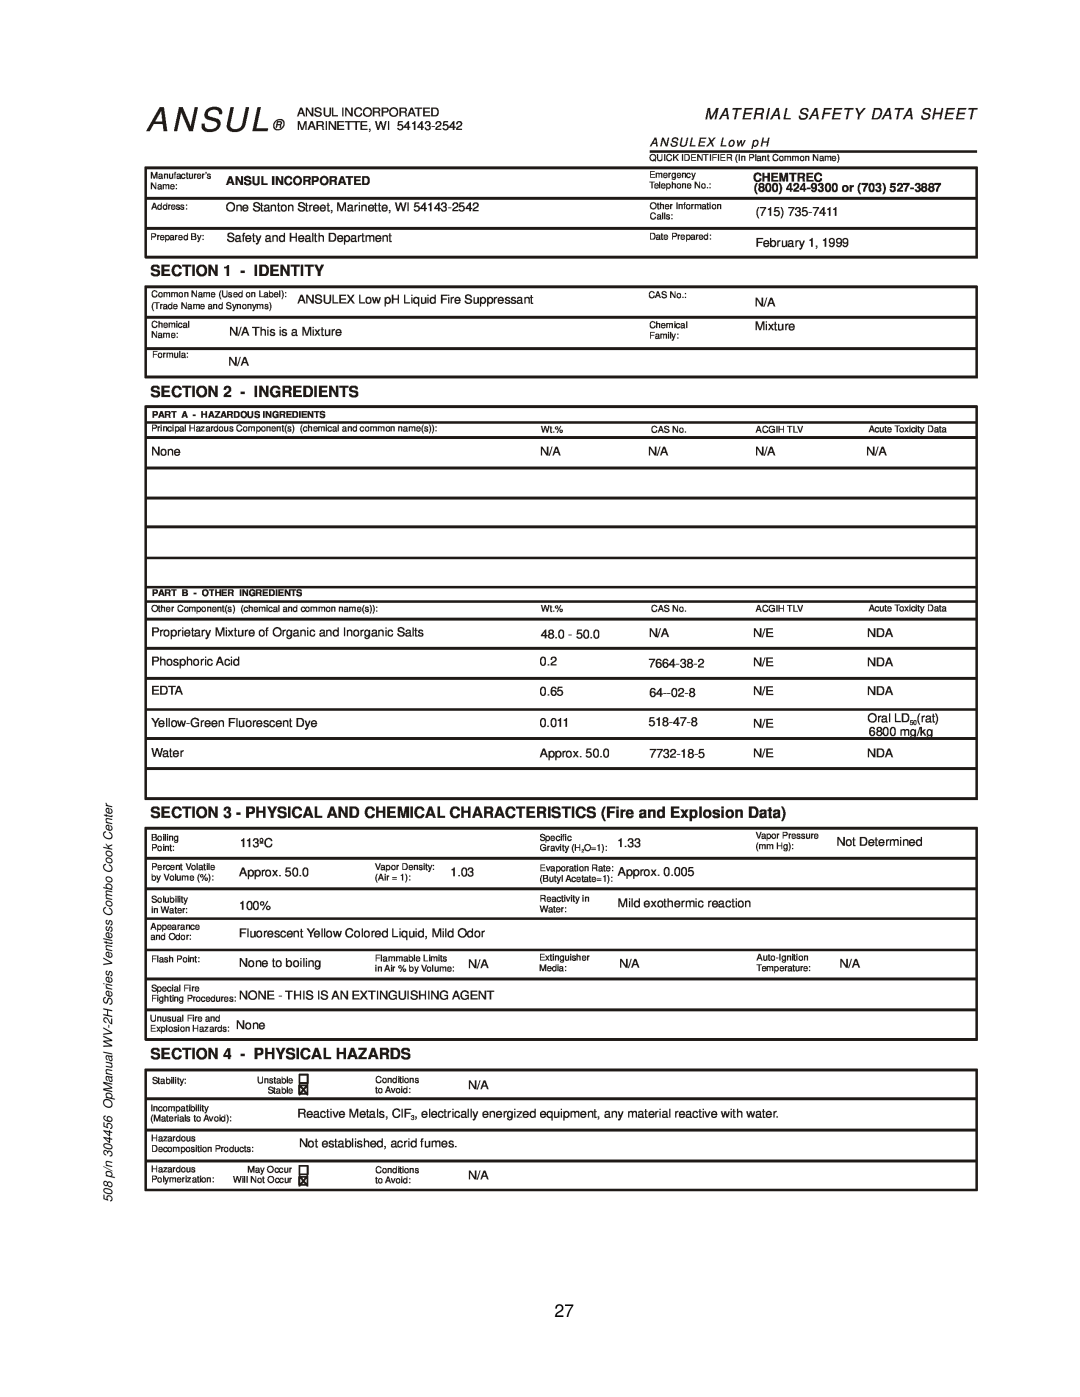 Bloomfield WV-2HFGRW Ansul, Material Safety Data Sheet, Identity, Ingredients, Physical Hazards, ANSULEX Low pH, Chemtrec 